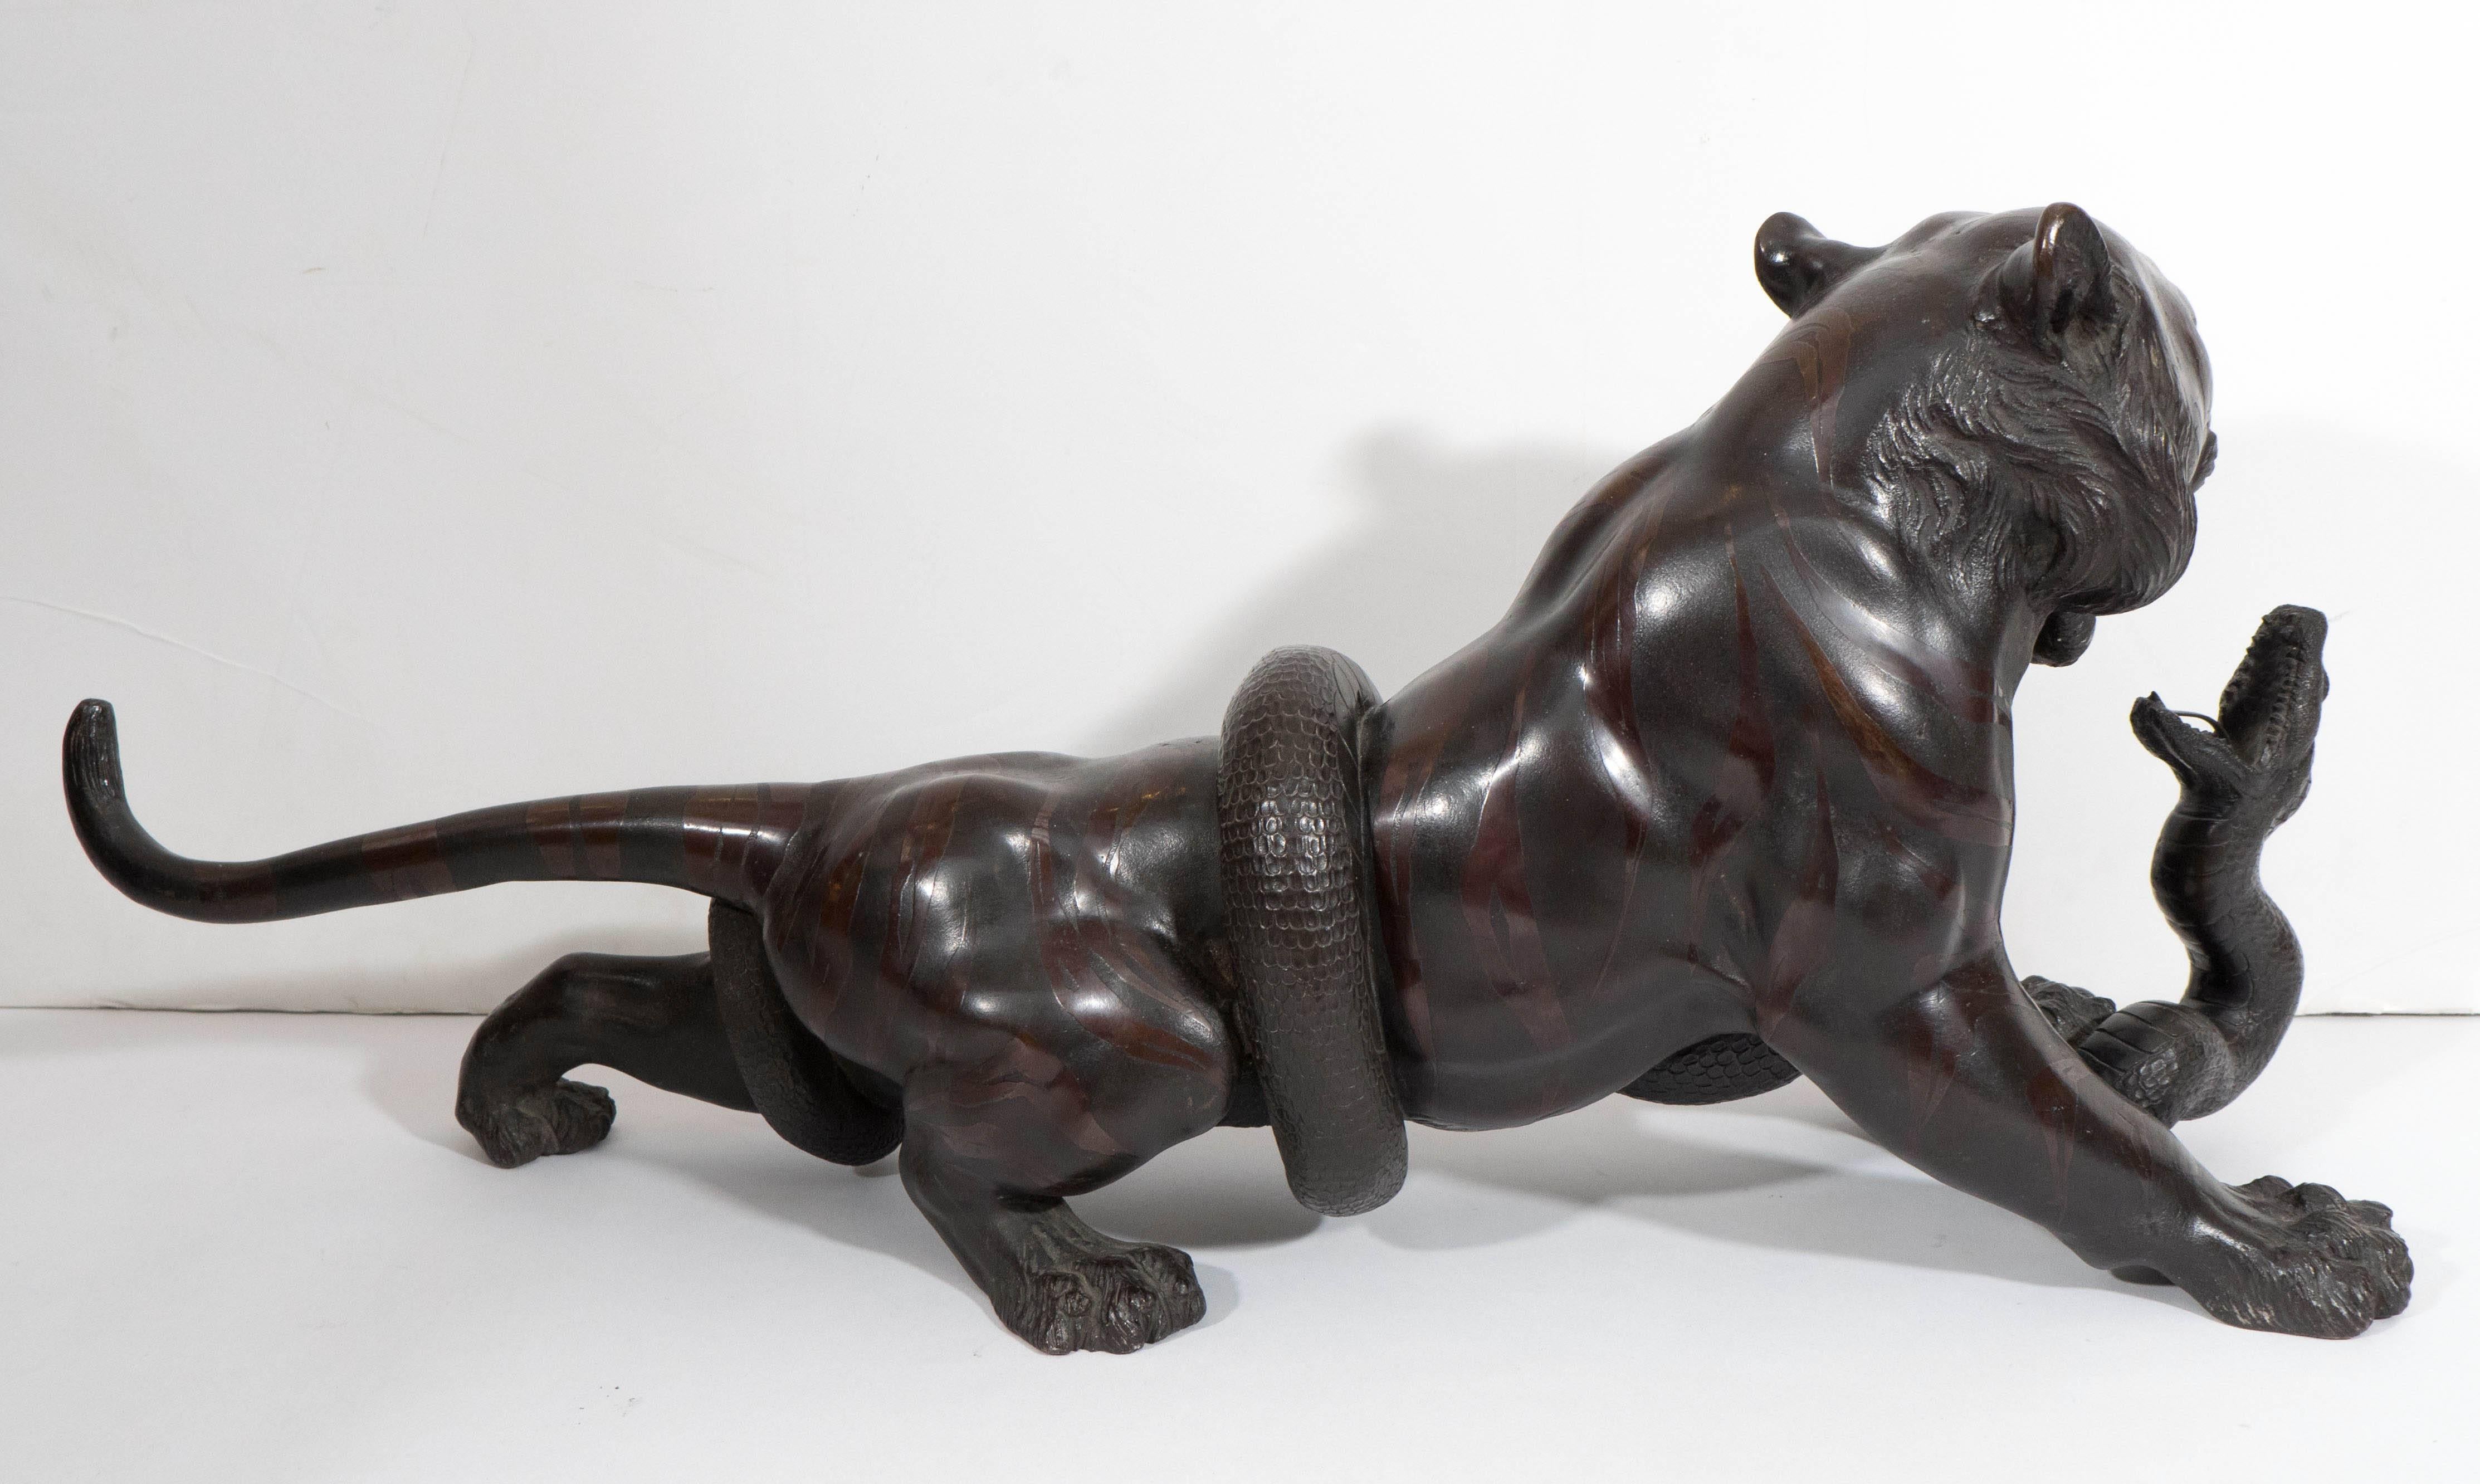 19th Century Japanese Tiger and Snake Sculpture in Bronze, Meiji Period